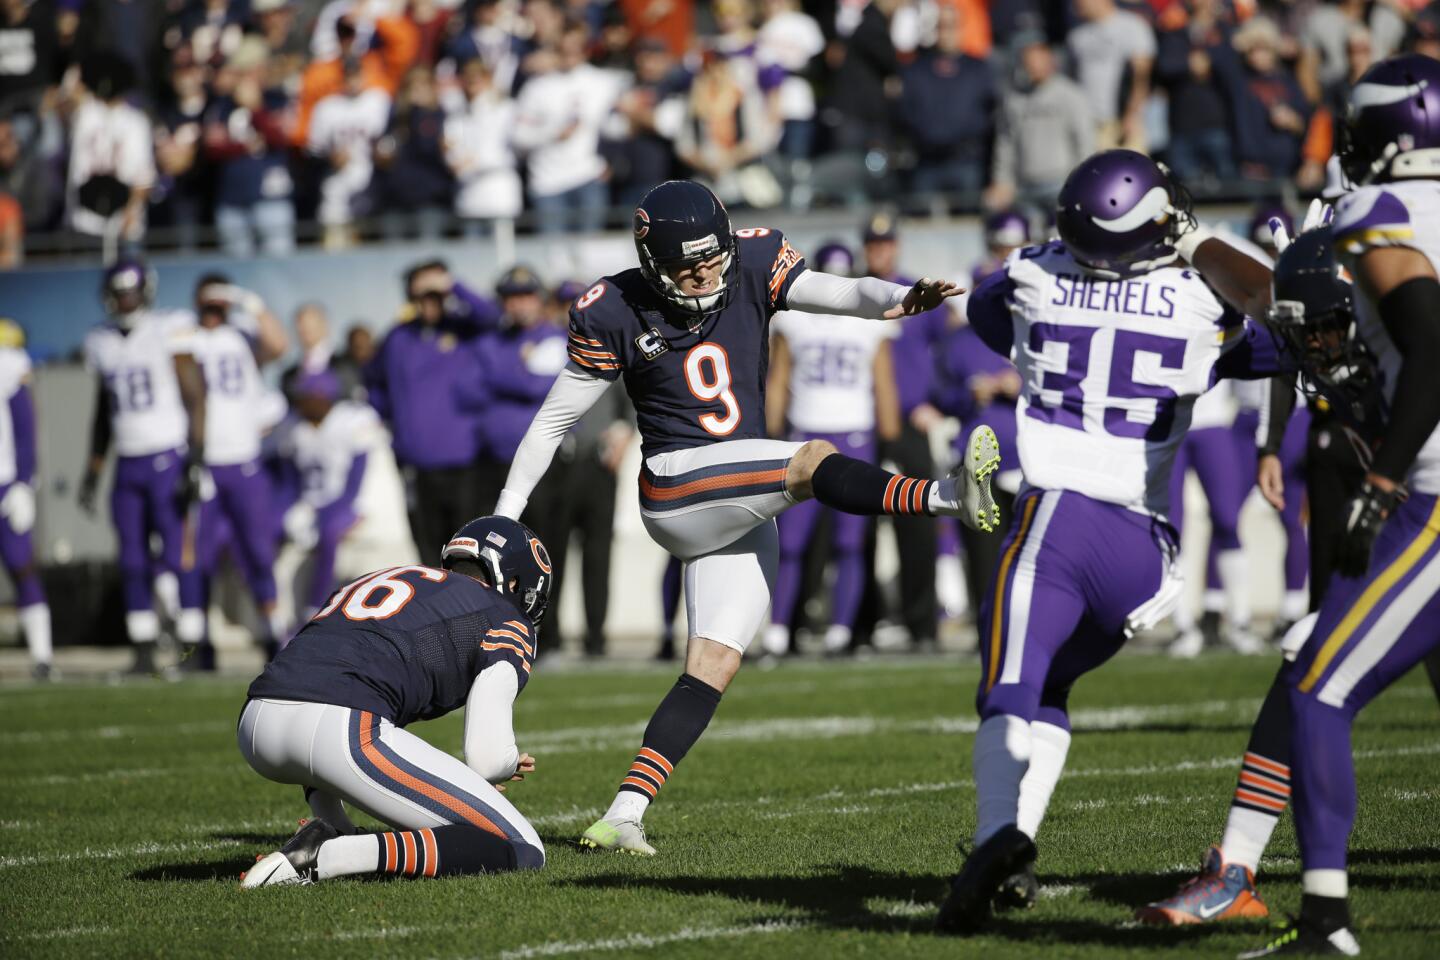 Robbie Gould kick an extra point during the first half against the Vikings.